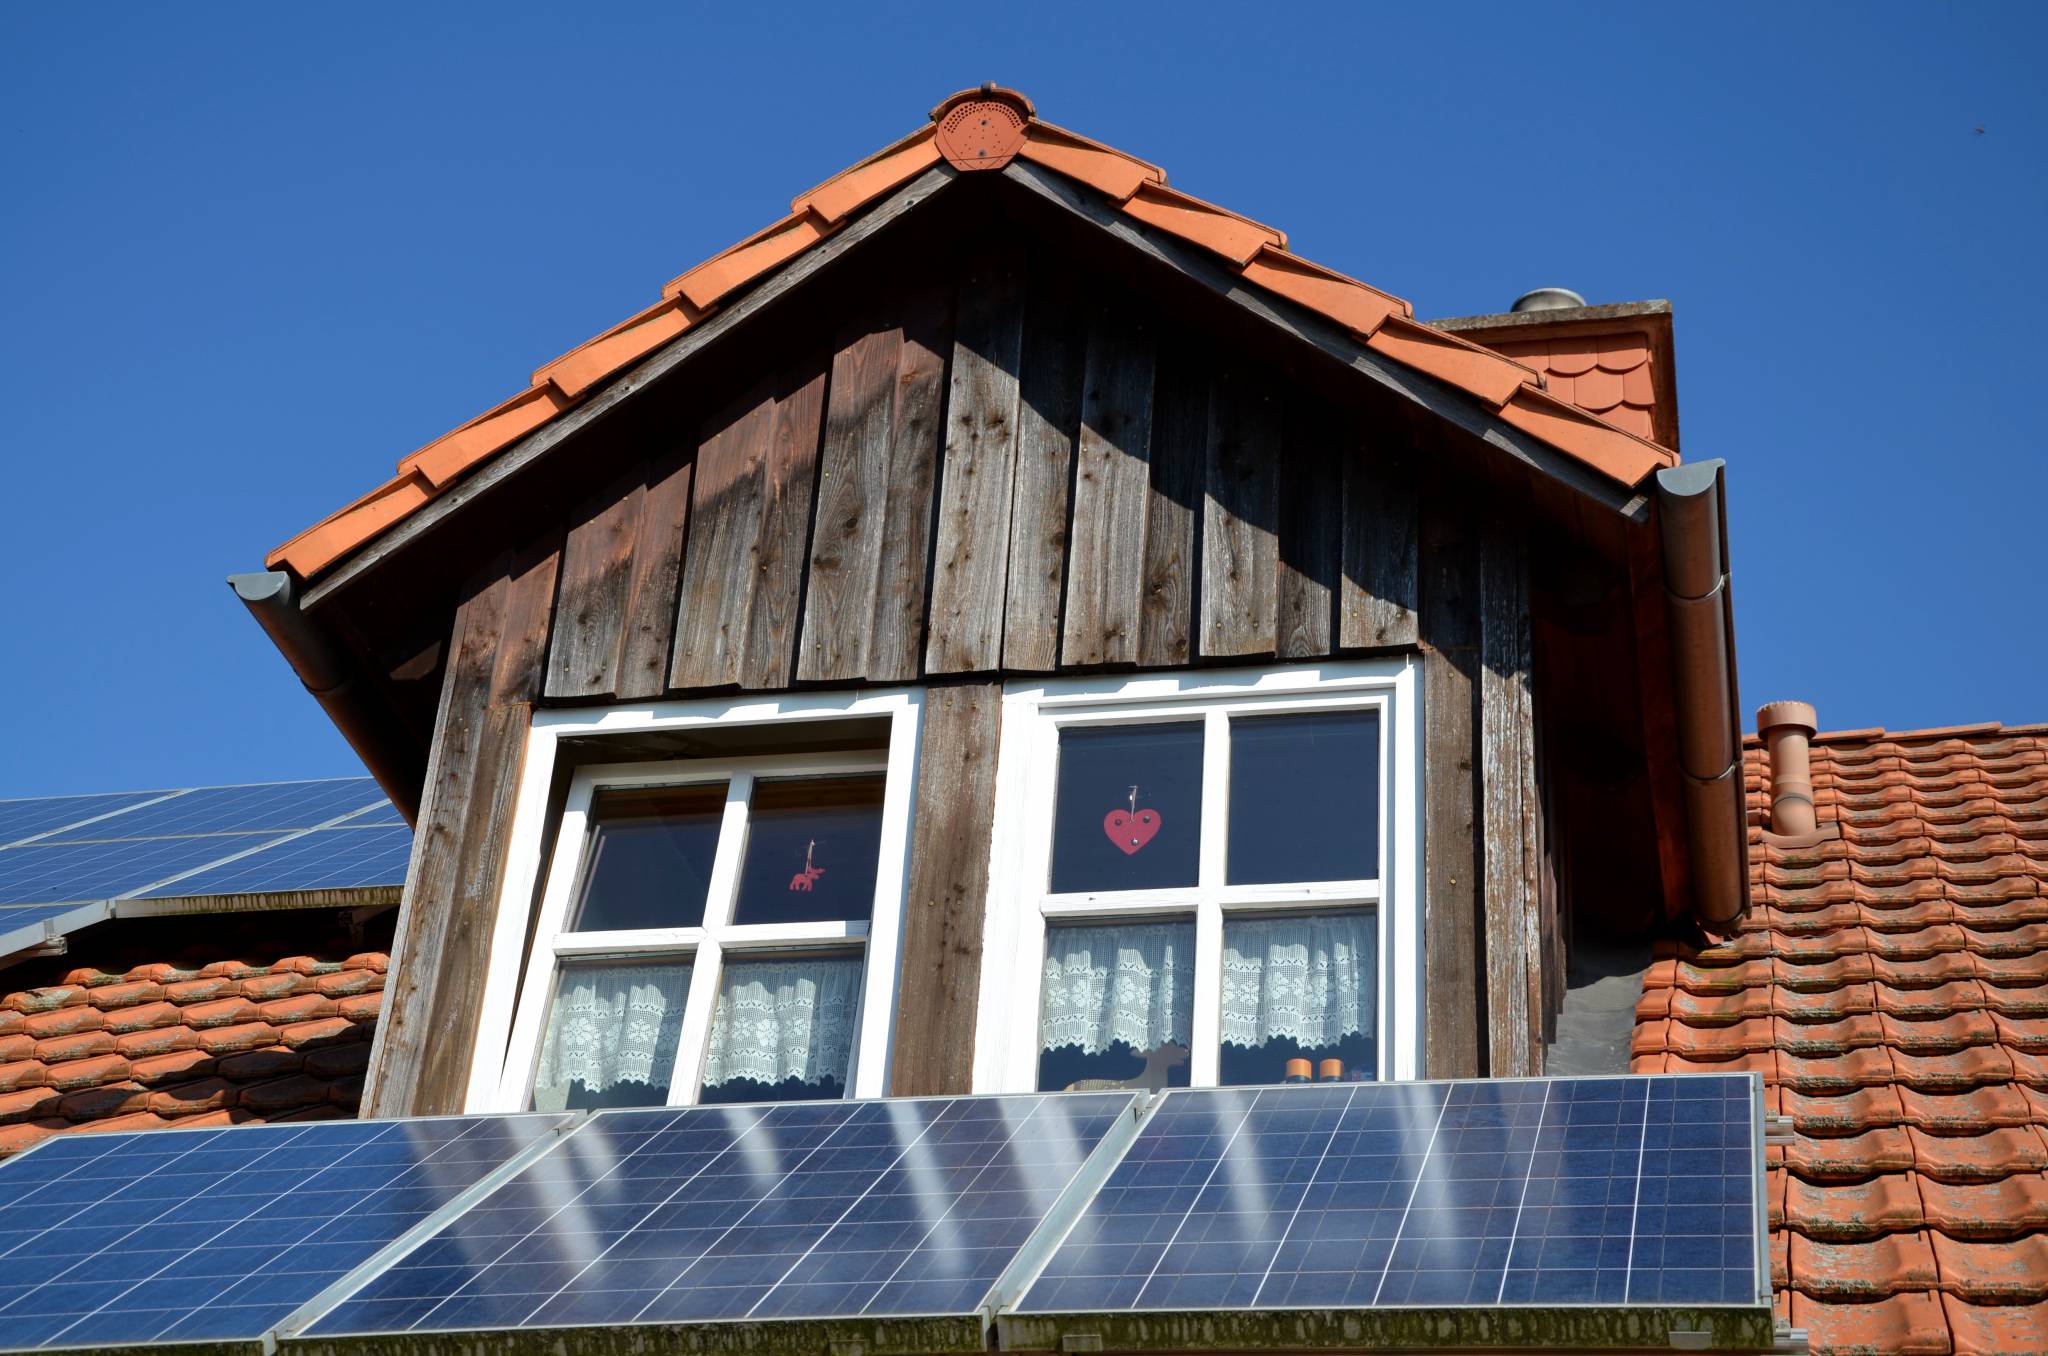 Identifying and Improving the Energy Performance of Historic Homes